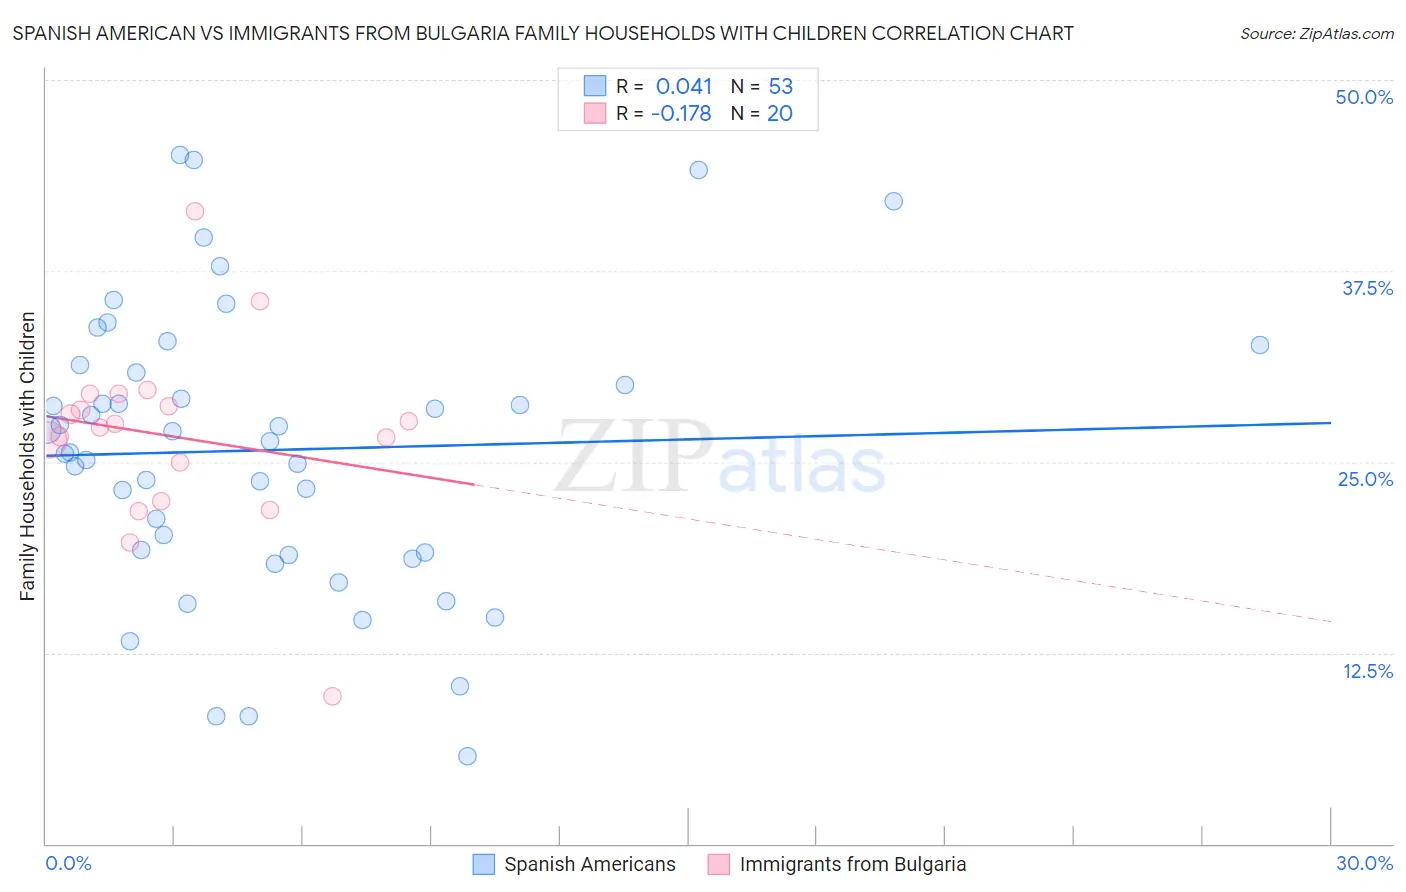 Spanish American vs Immigrants from Bulgaria Family Households with Children